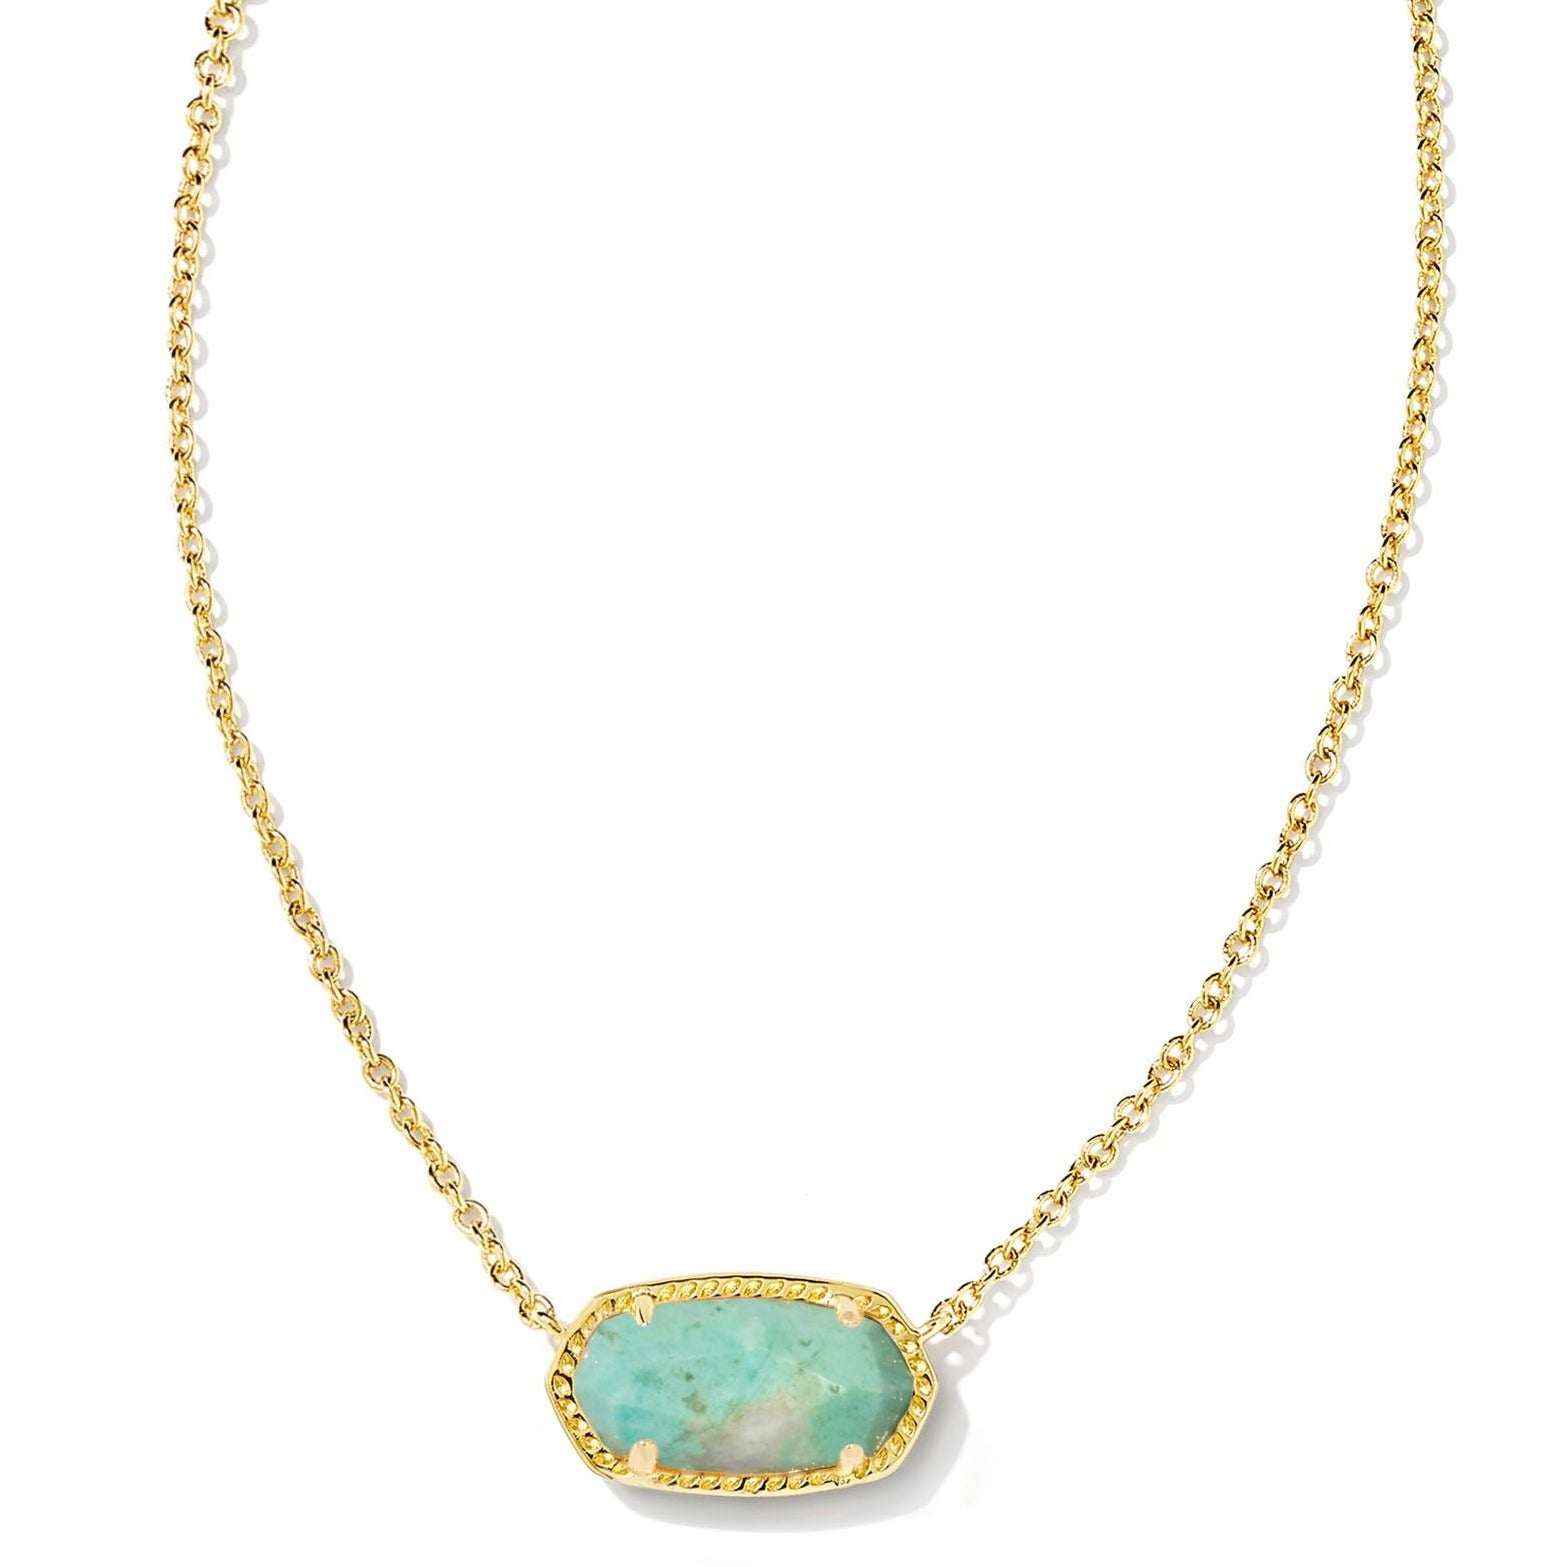 Kendra Scott | Elisa Gold Short Pendant Necklace in Sea Green Chrysocolla - Giddy Up Glamour Boutique